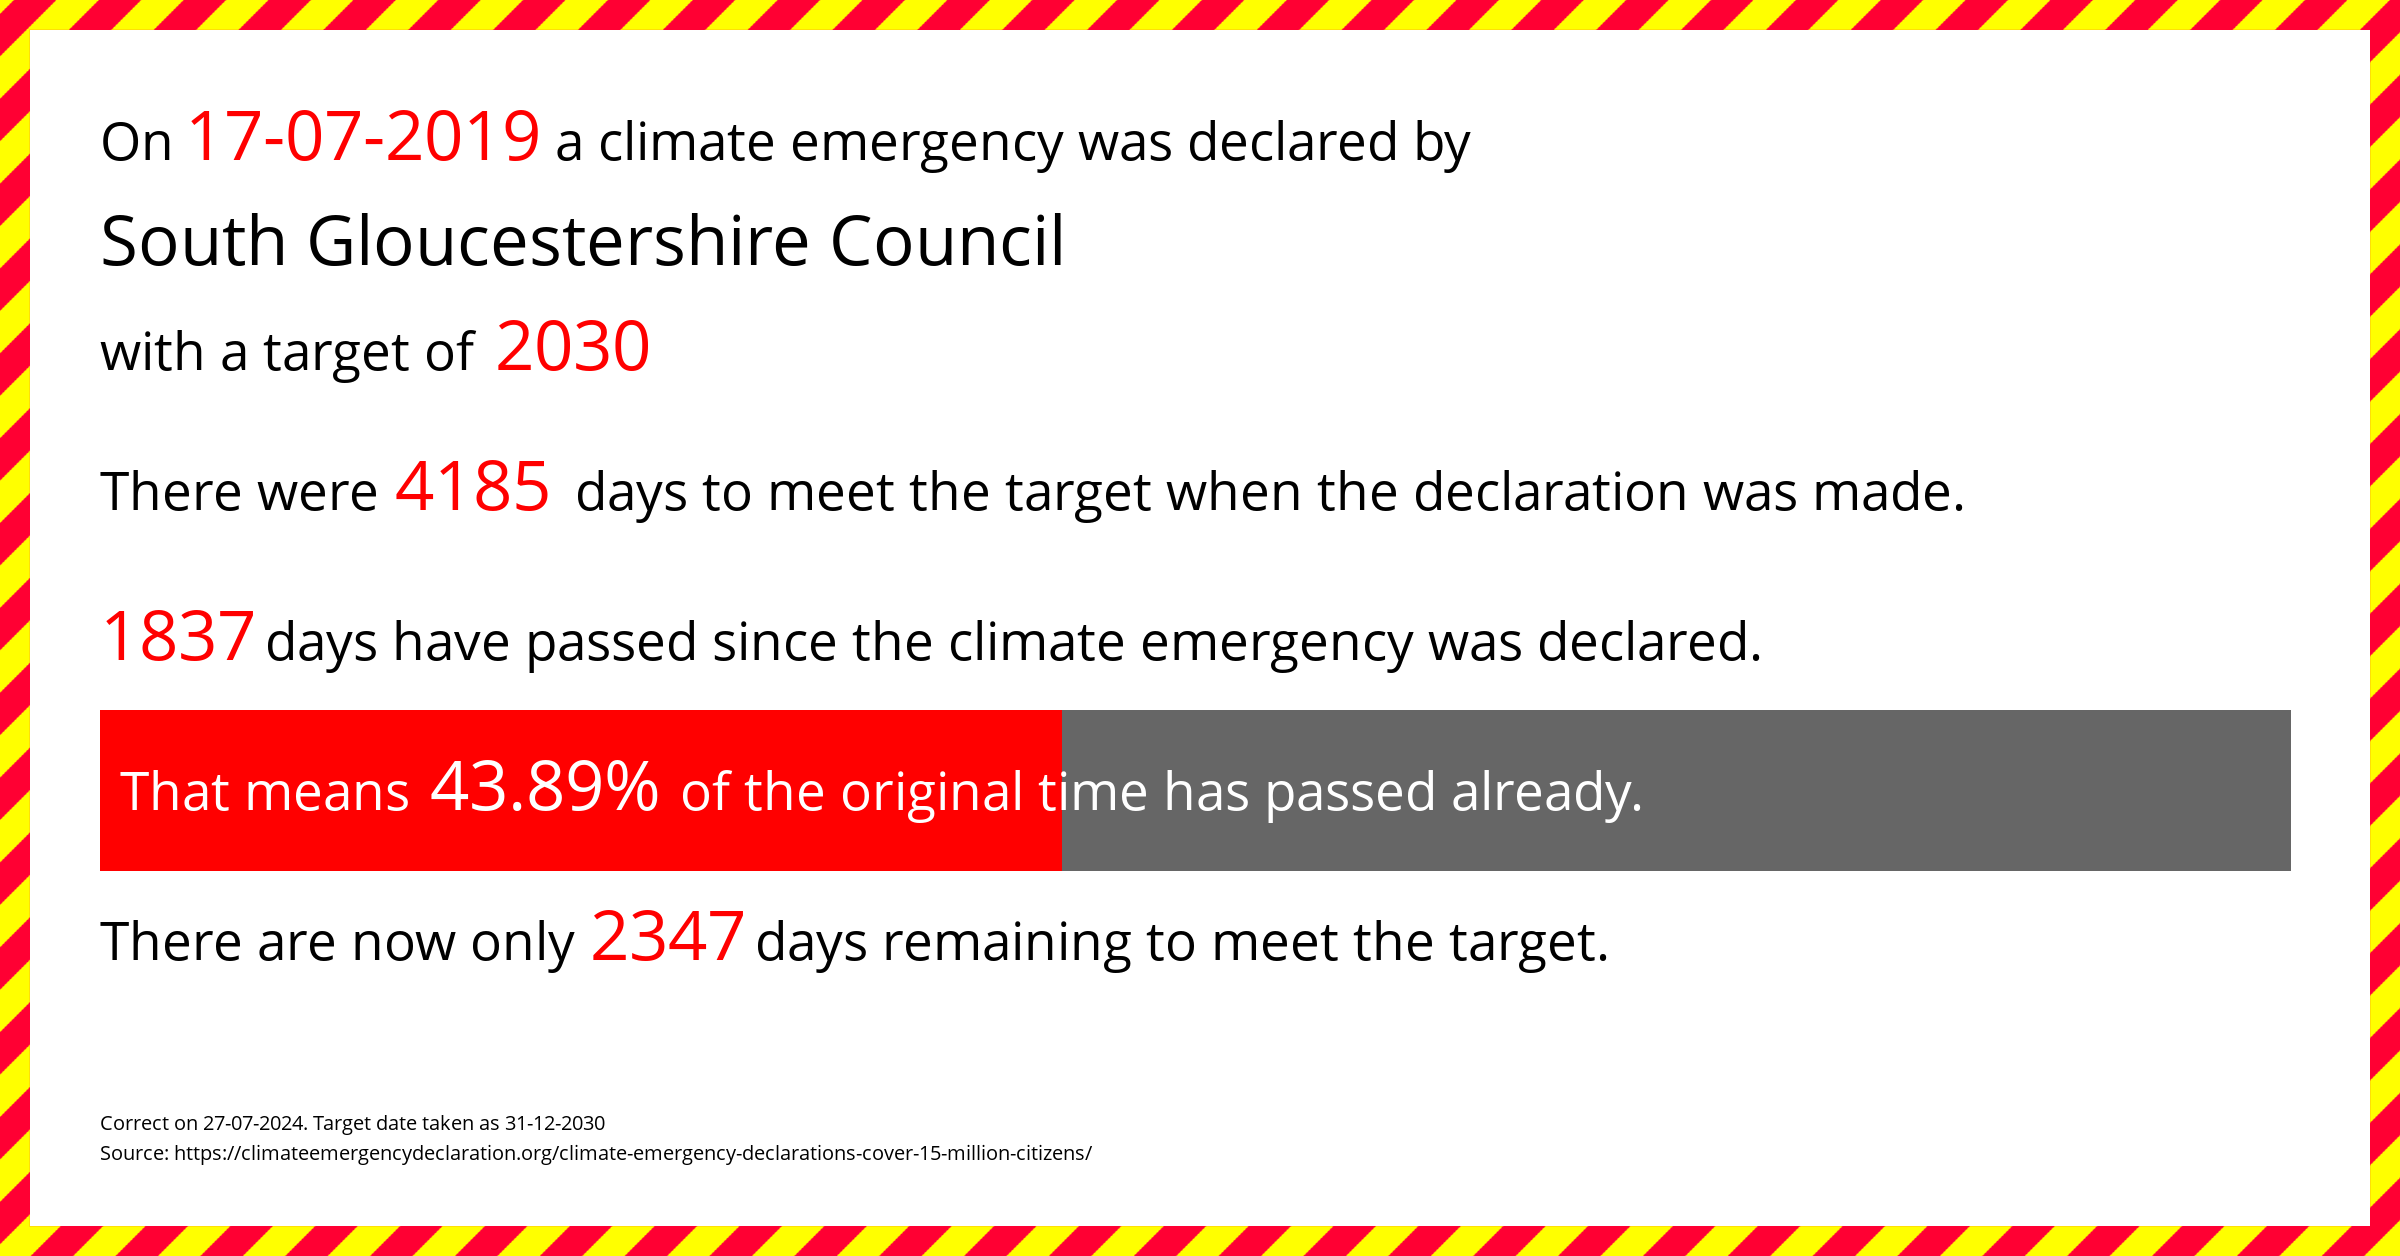 South Gloucestershire Council declared a Climate emergency on Wednesday 17th July 2019, with a target of 2030.